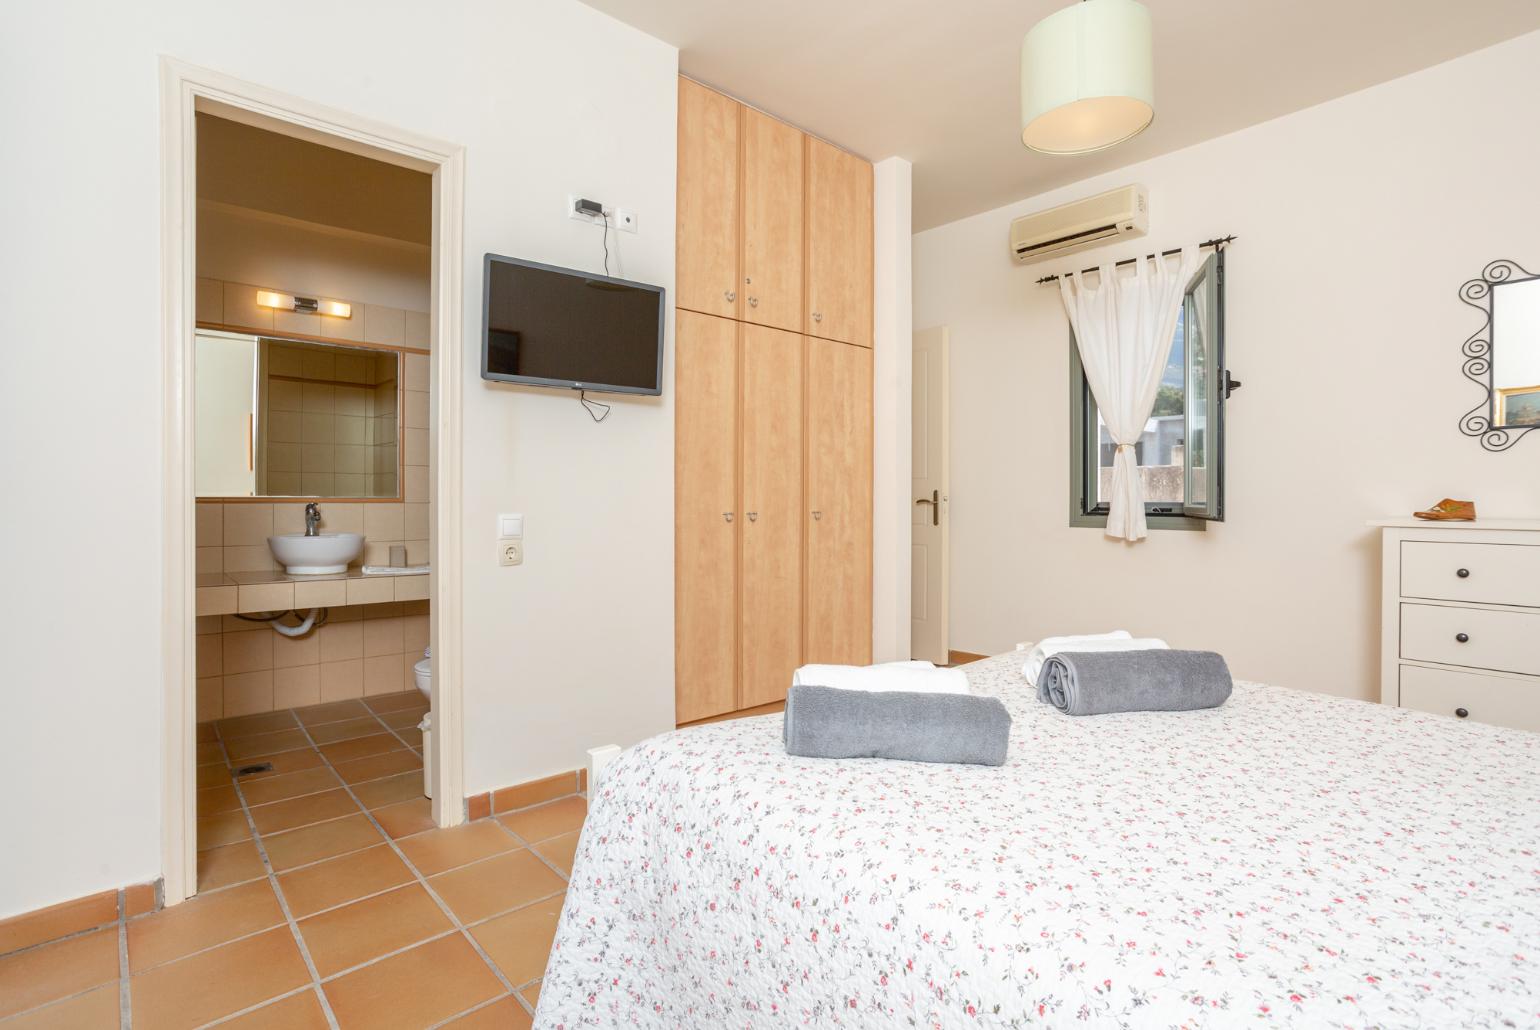 Double bedroom with en suite bathroom, A/C, TV, and terrace access